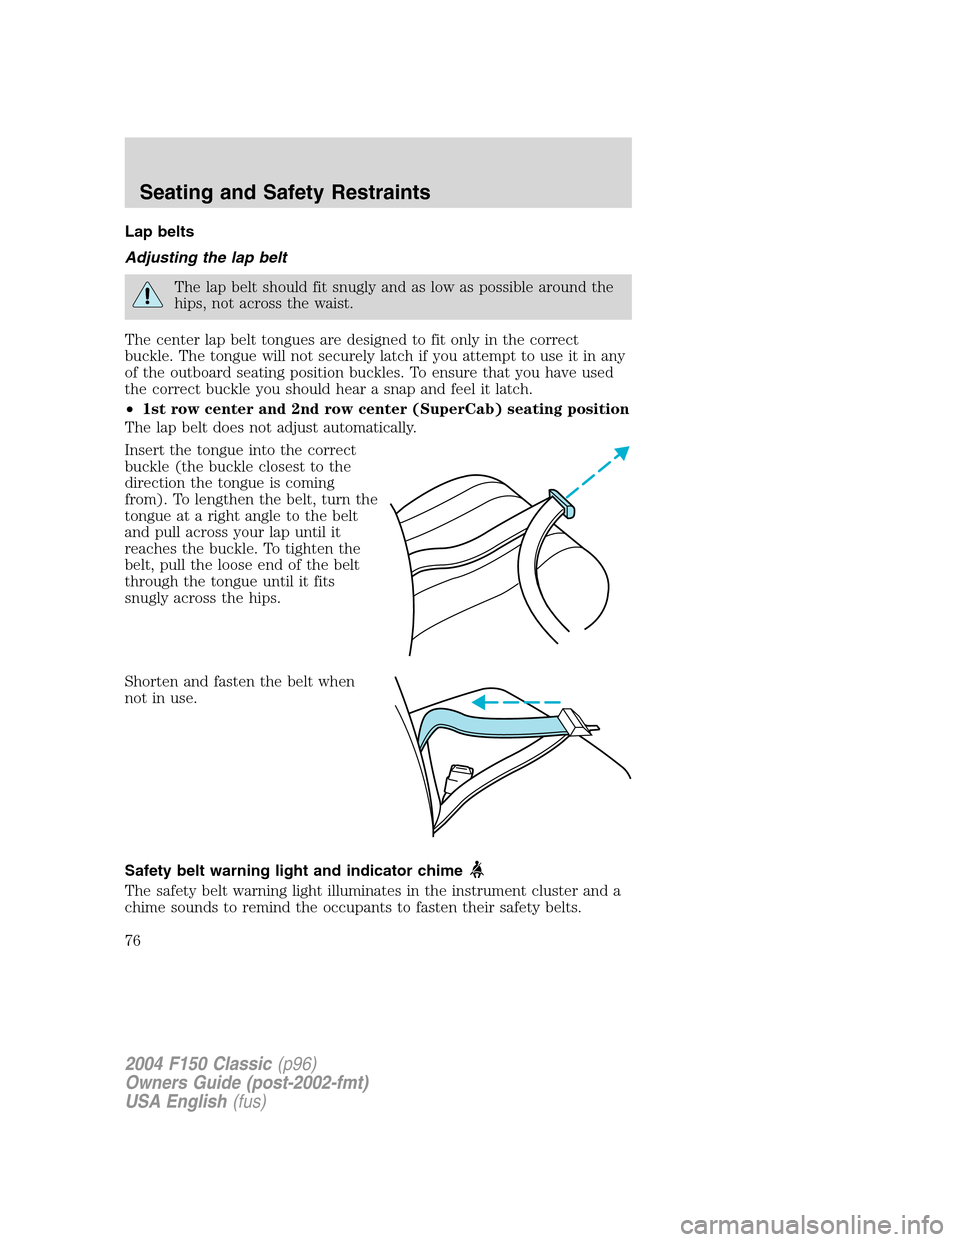 FORD F150 2004 11.G Herritage Owners Manual Lap belts
Adjusting the lap belt
The lap belt should fit snugly and as low as possible around the
hips, not across the waist.
The center lap belt tongues are designed to fit only in the correct
buckle